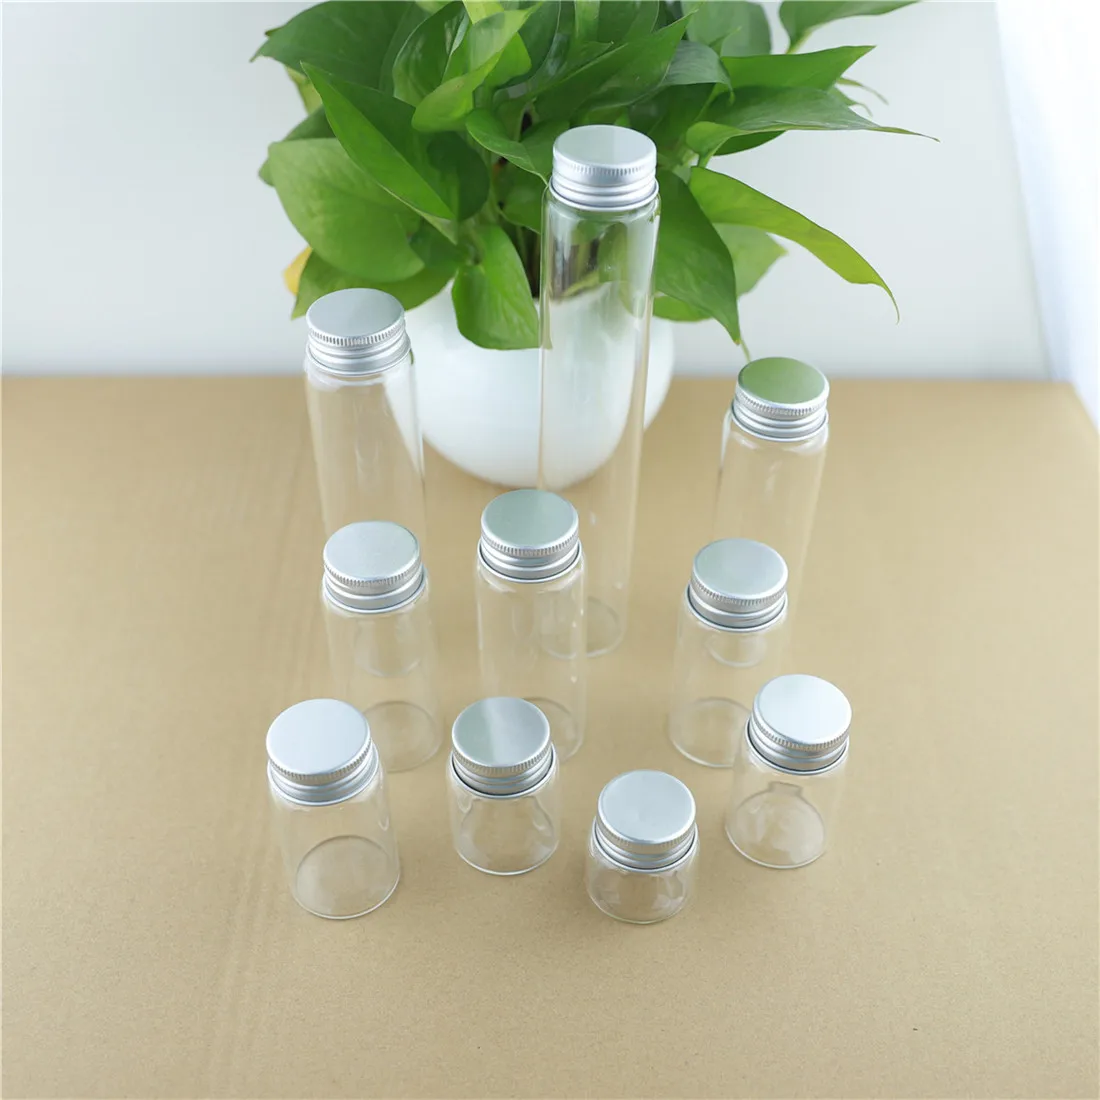 48 Pieces 37*50mm 30ml Glass Jars Bottle Test Tube Empty Jar Container Small  Vial Glass Bottle Spice Storage Jars Containers - Storage Bottles & Jars -  AliExpress